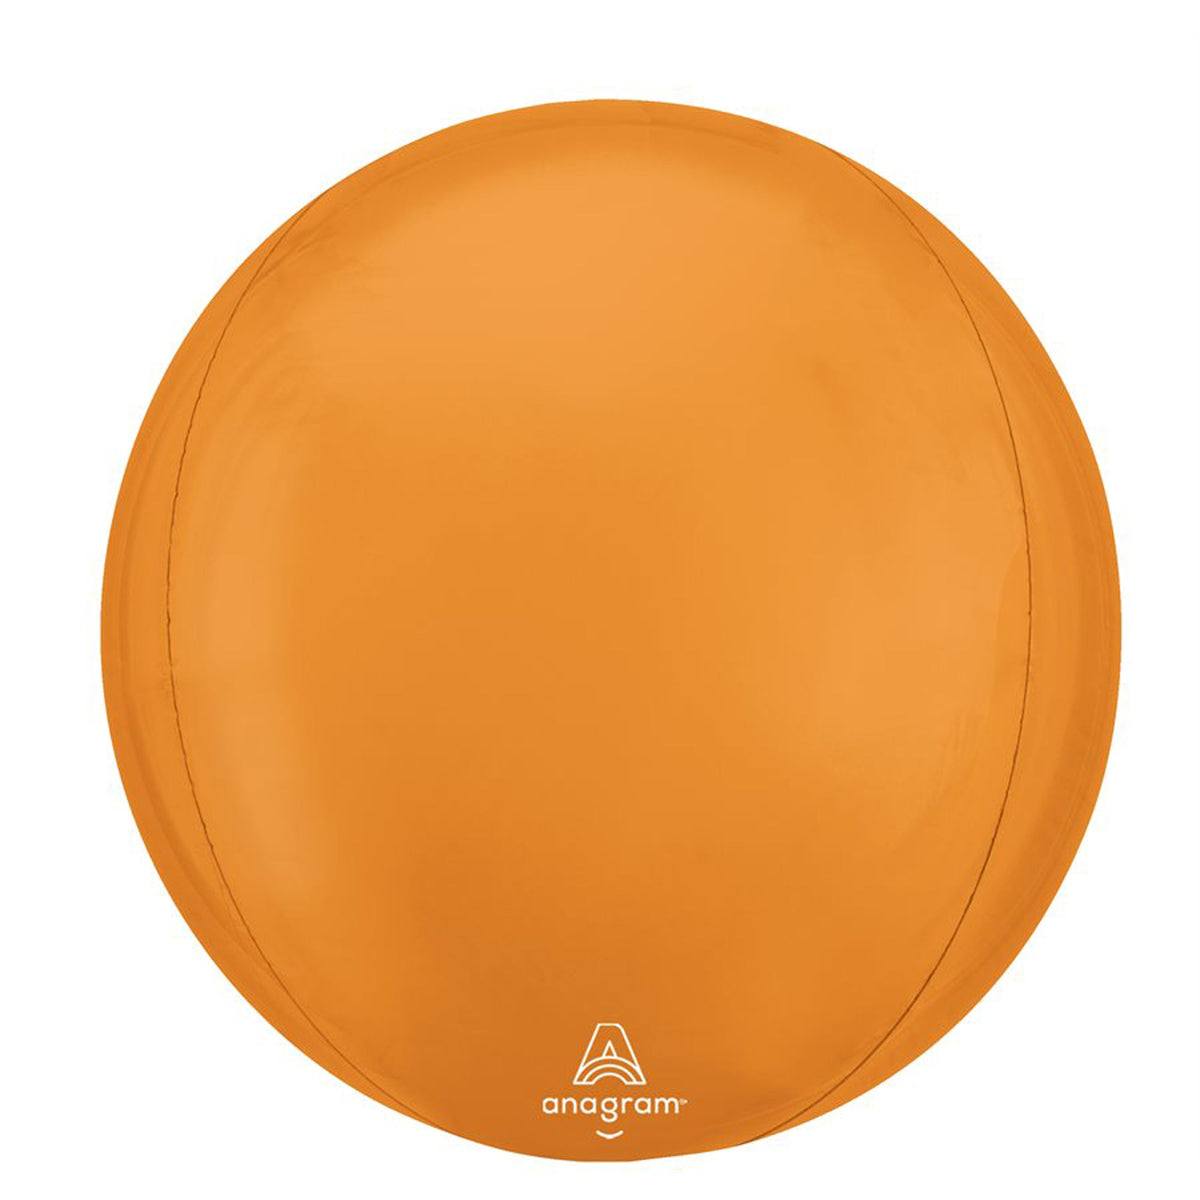 LE GROUPE BLC INTL INC Balloons Vibrant Orange Orbz Balloon, 15 Inches, 1 Count 026635471138